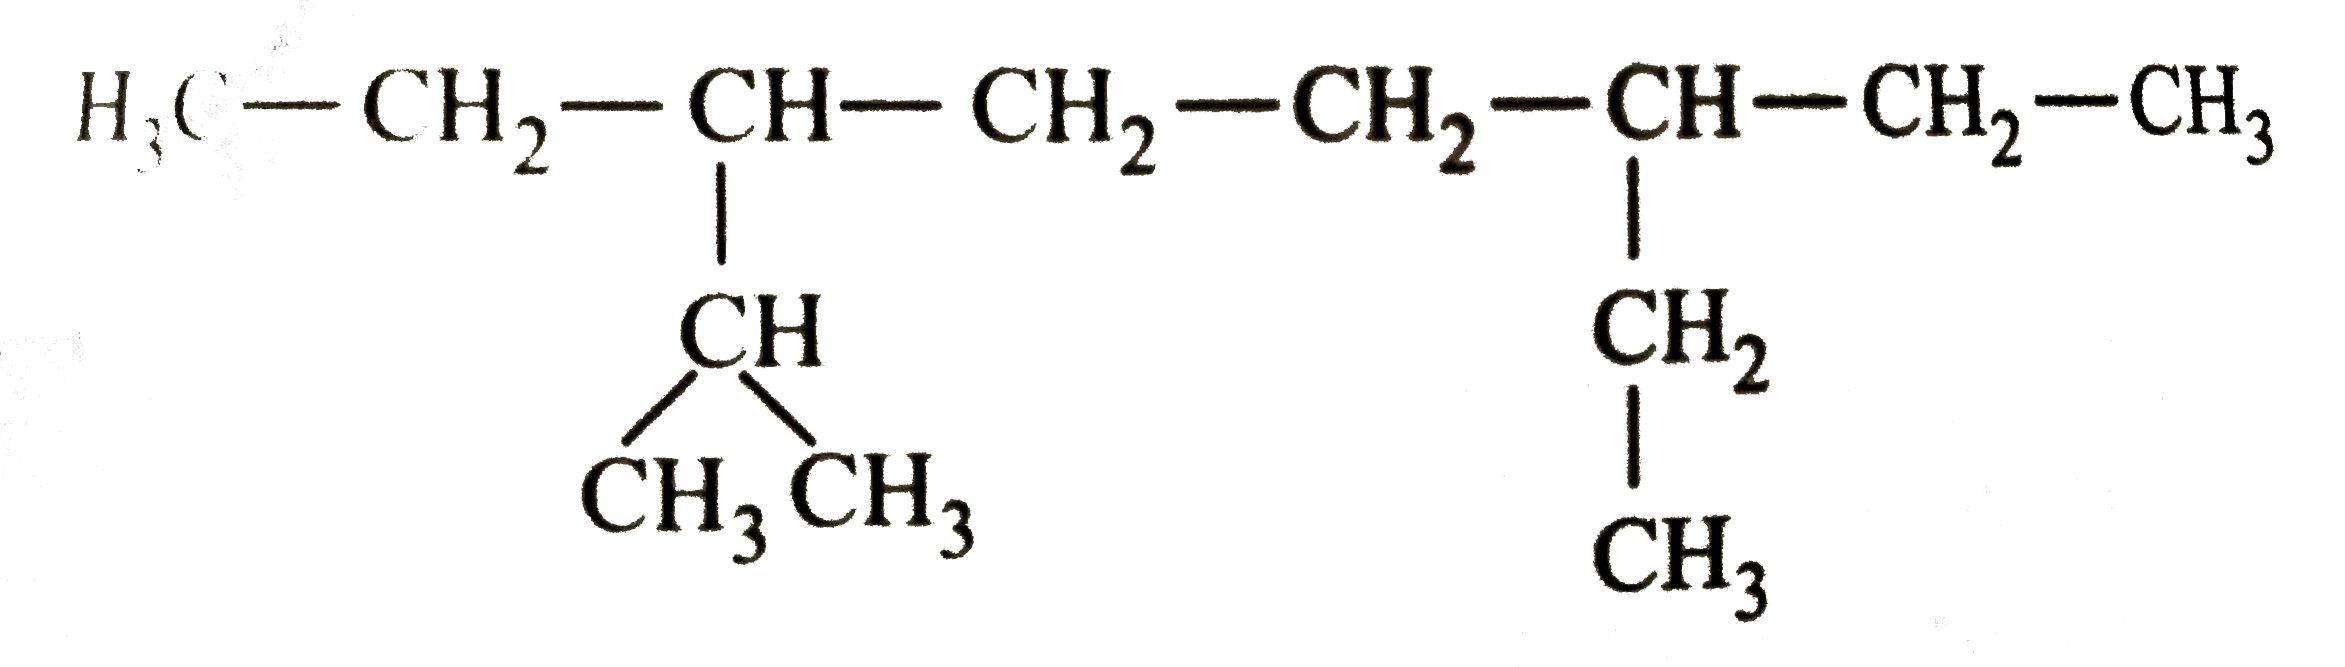 The correct IUPAC name of the following alkane is